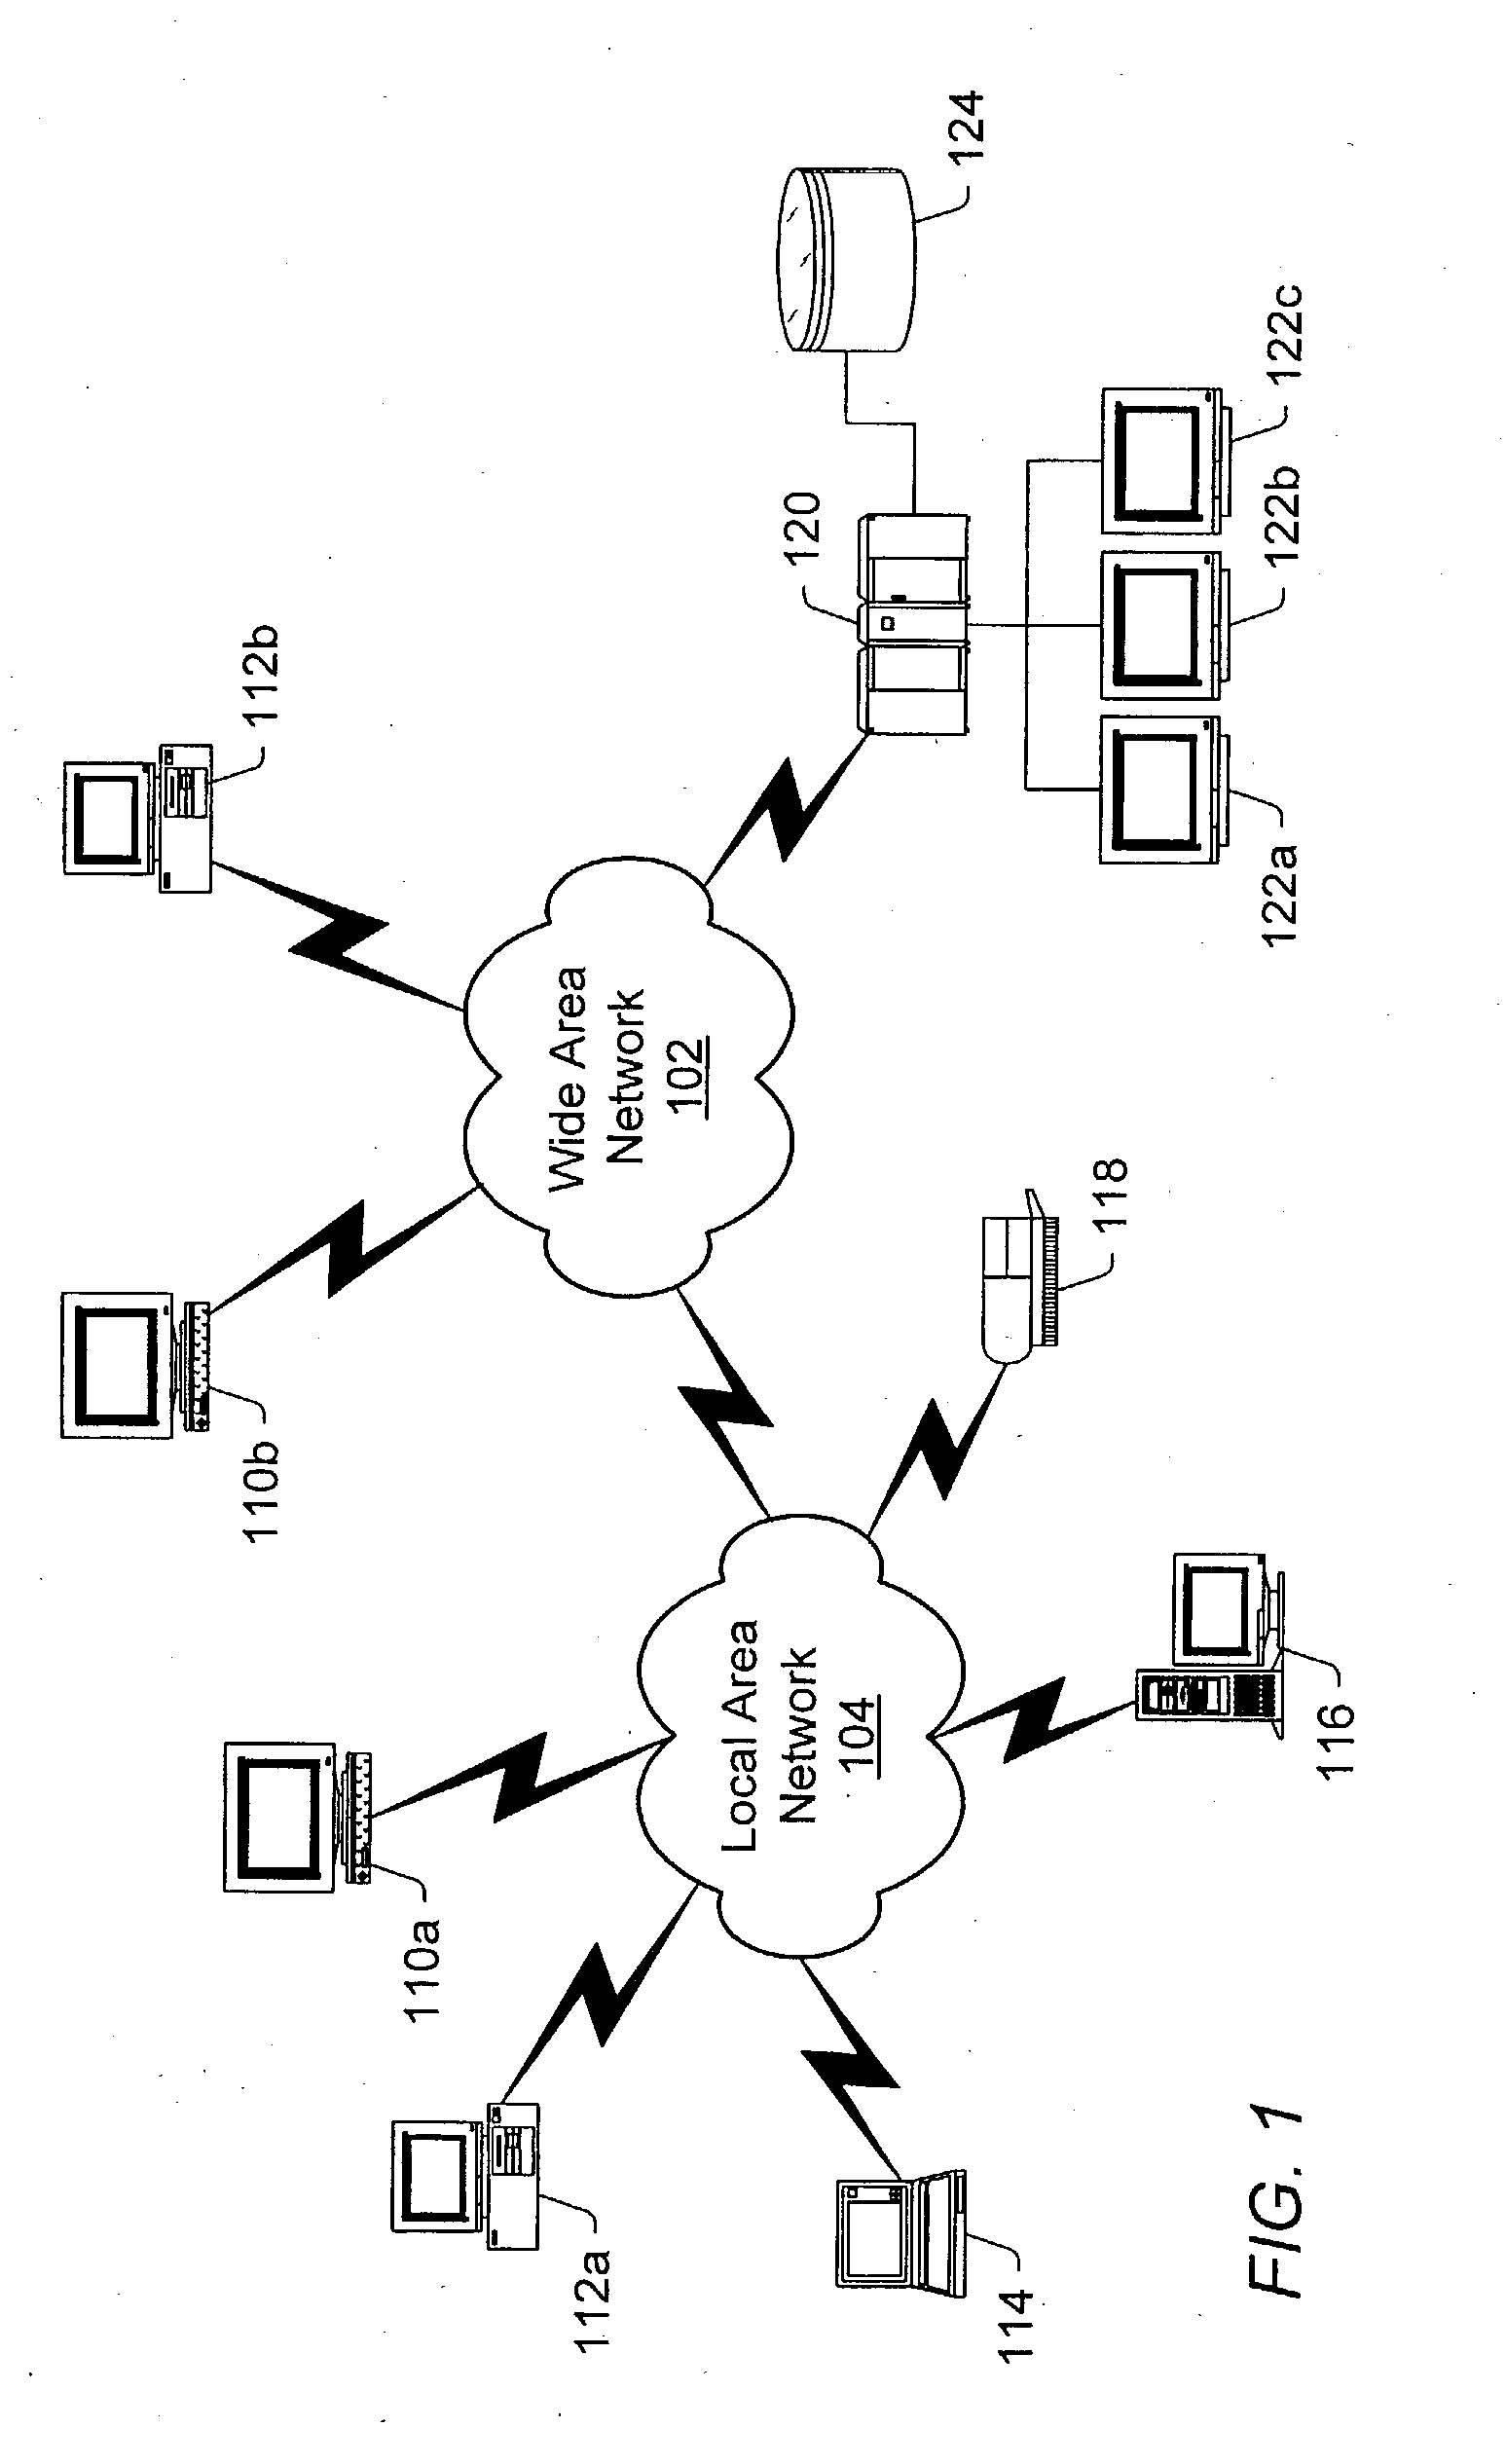 Computerized method and system for estimating liability for an accident from an investigation of the accident